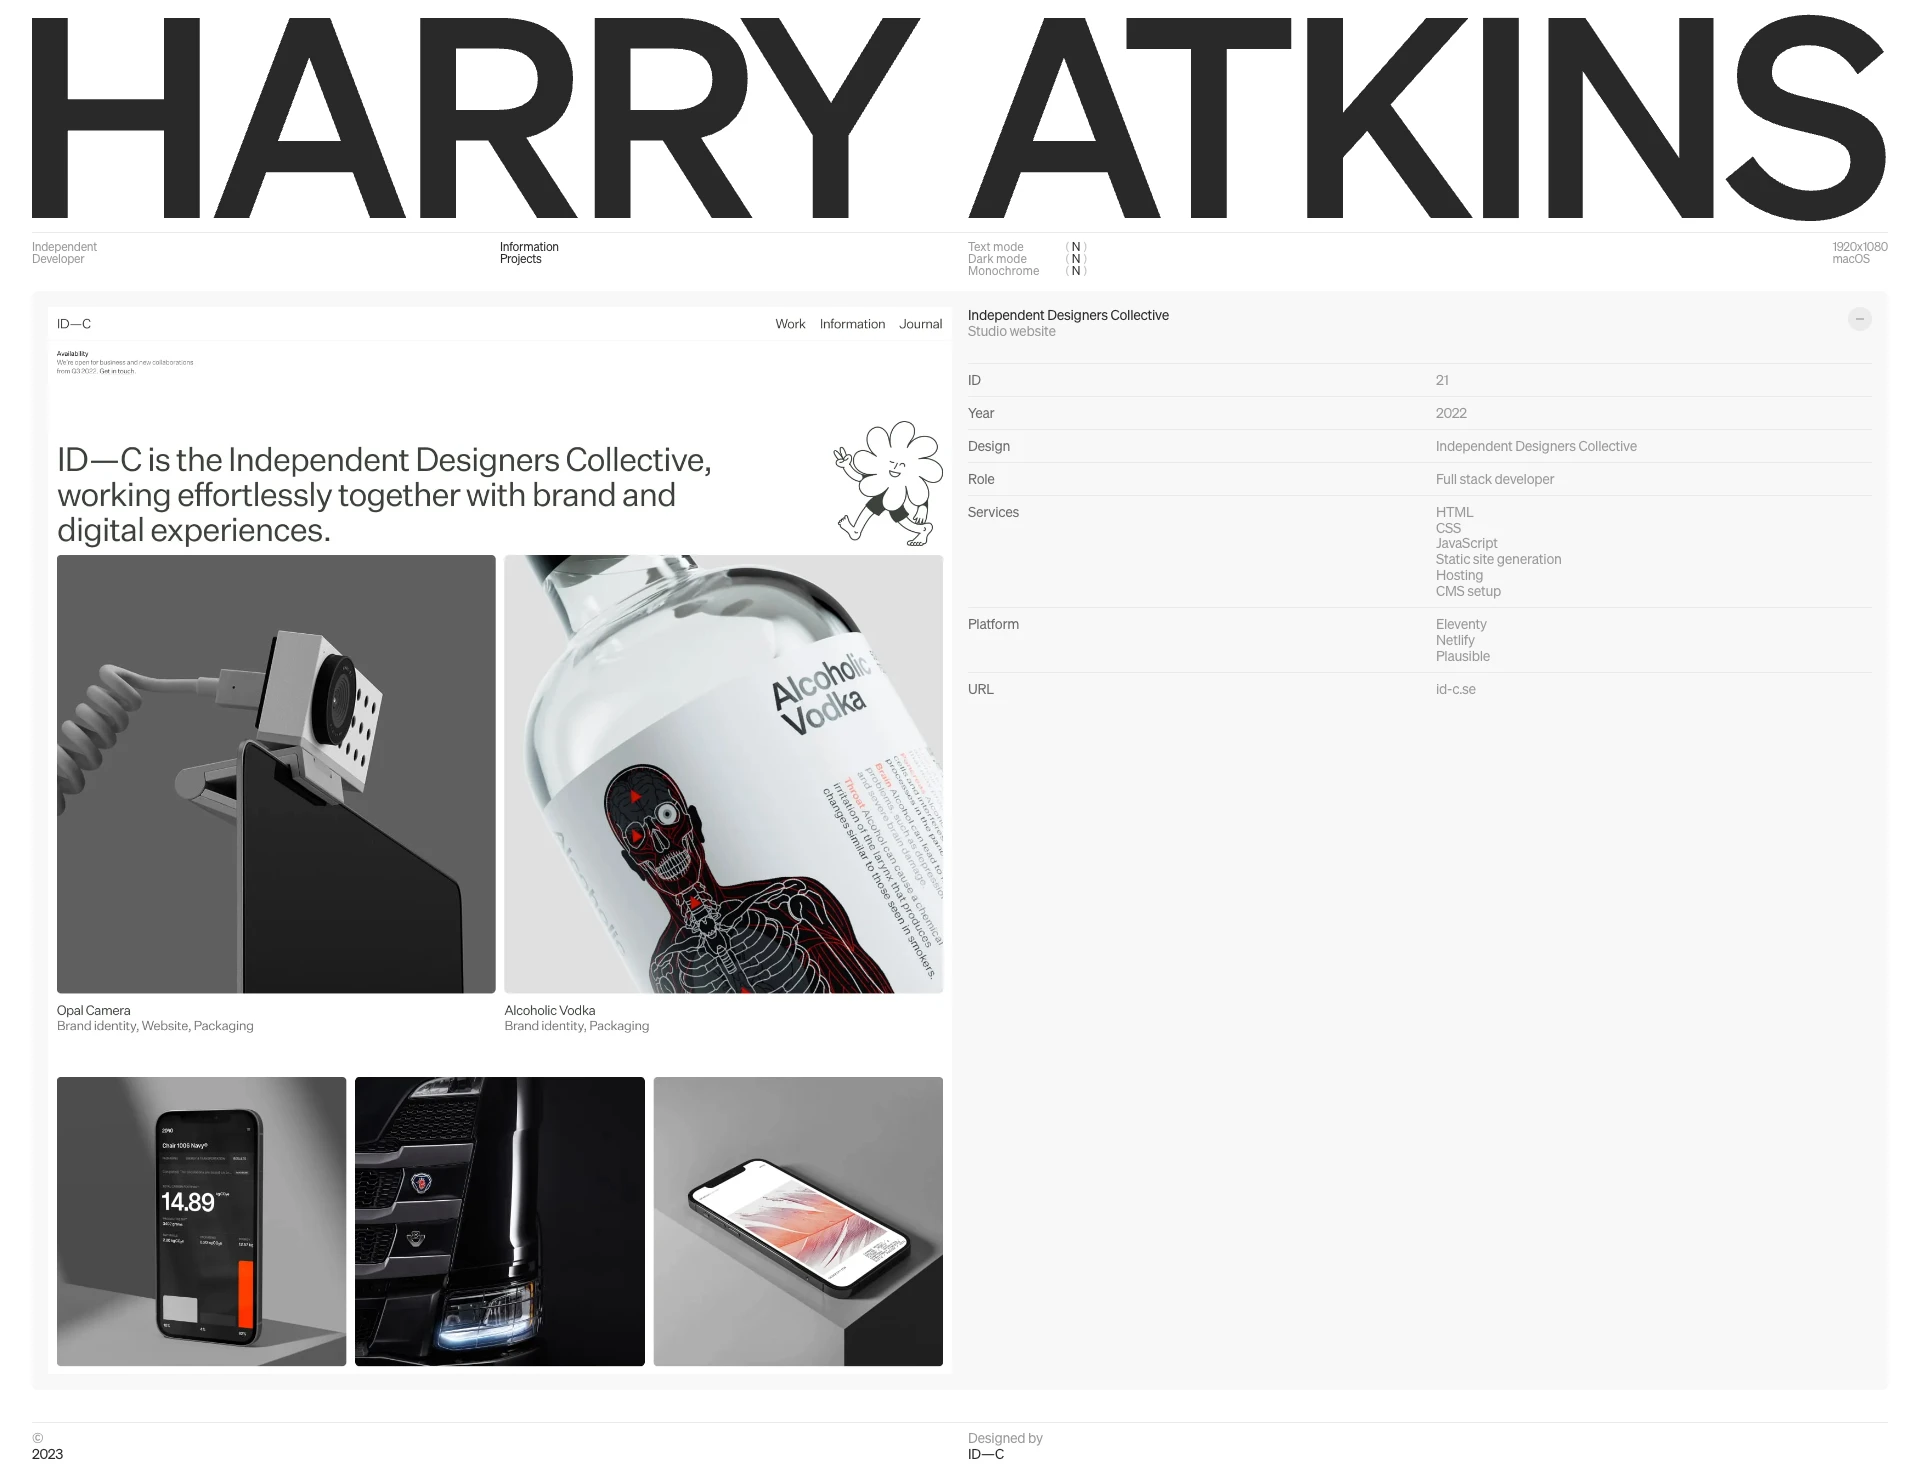 Harry Atkins Landing Page Example: I specialise in front-end development. Being independent, I work with small to large companies, startups, design studios, and creative individuals globally.